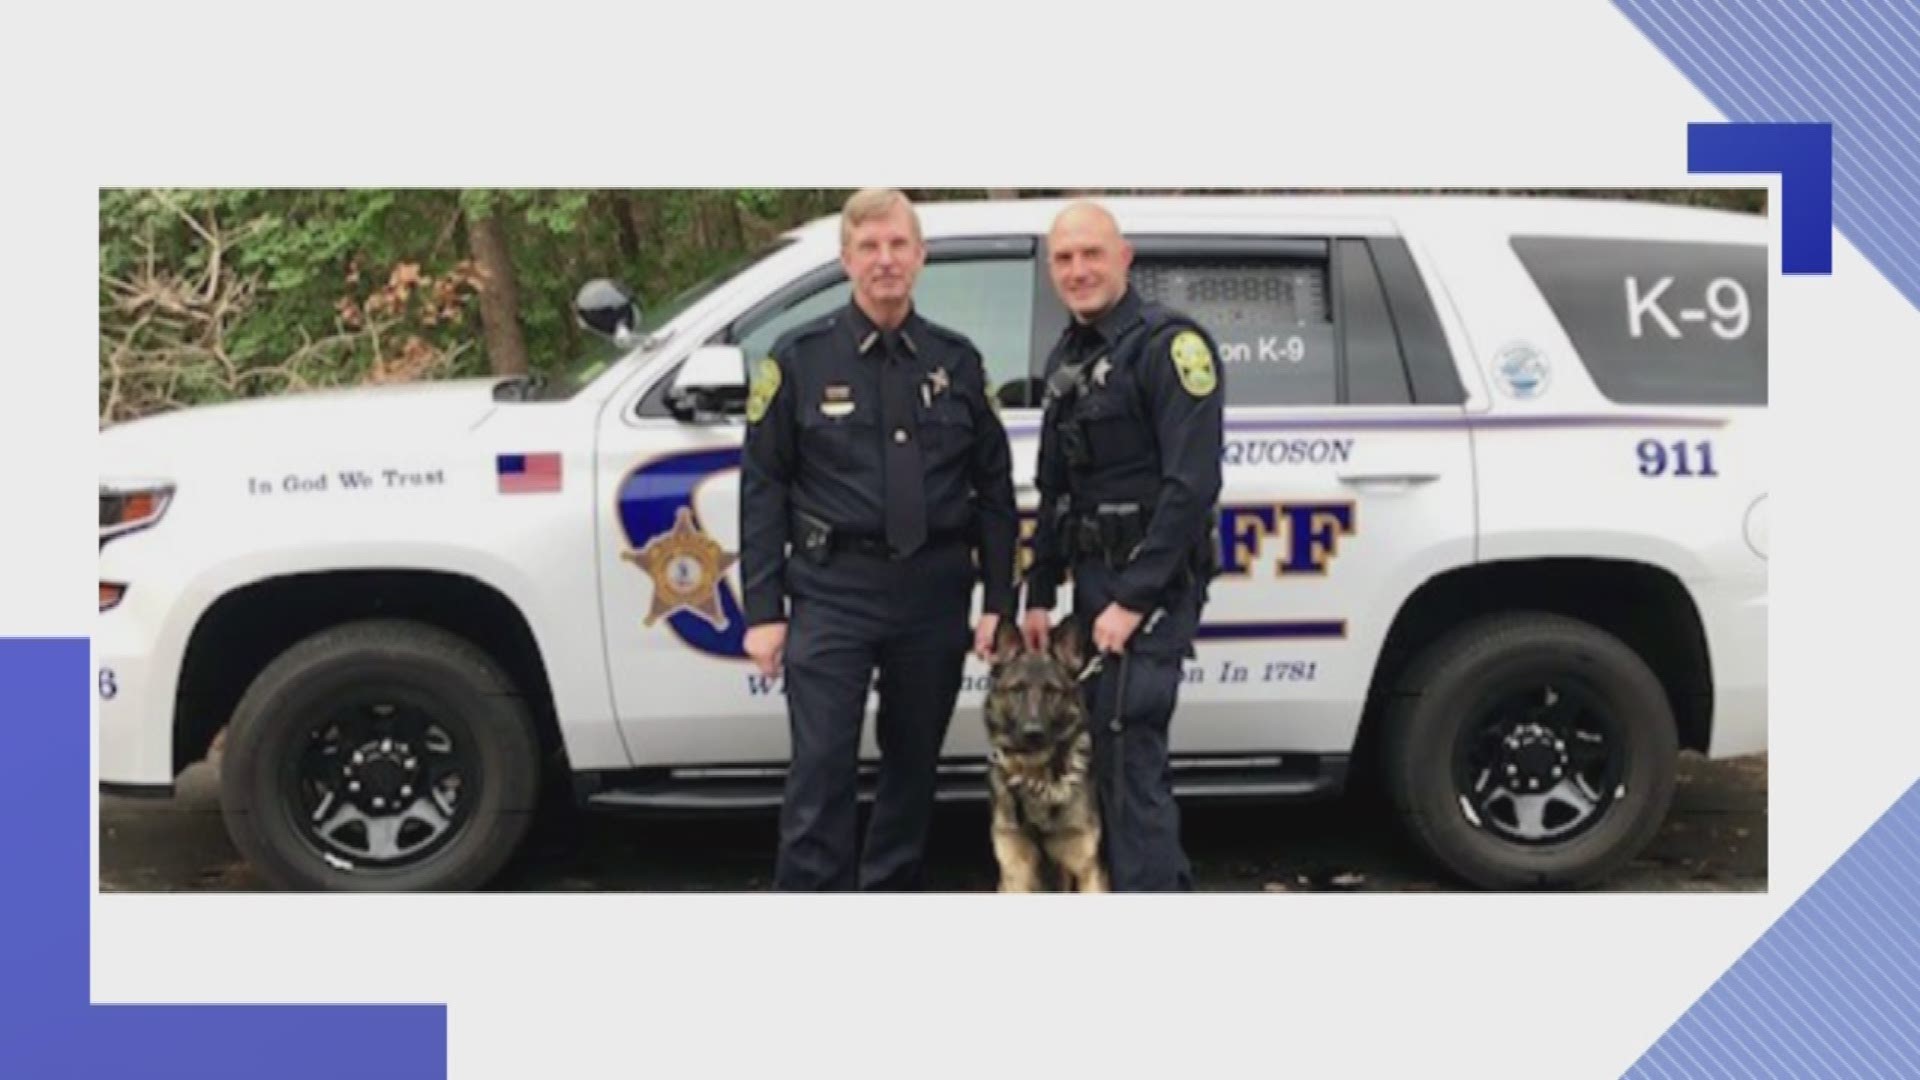 A police K-9 just started its career with the York-Poquoson Sheriff's Office.